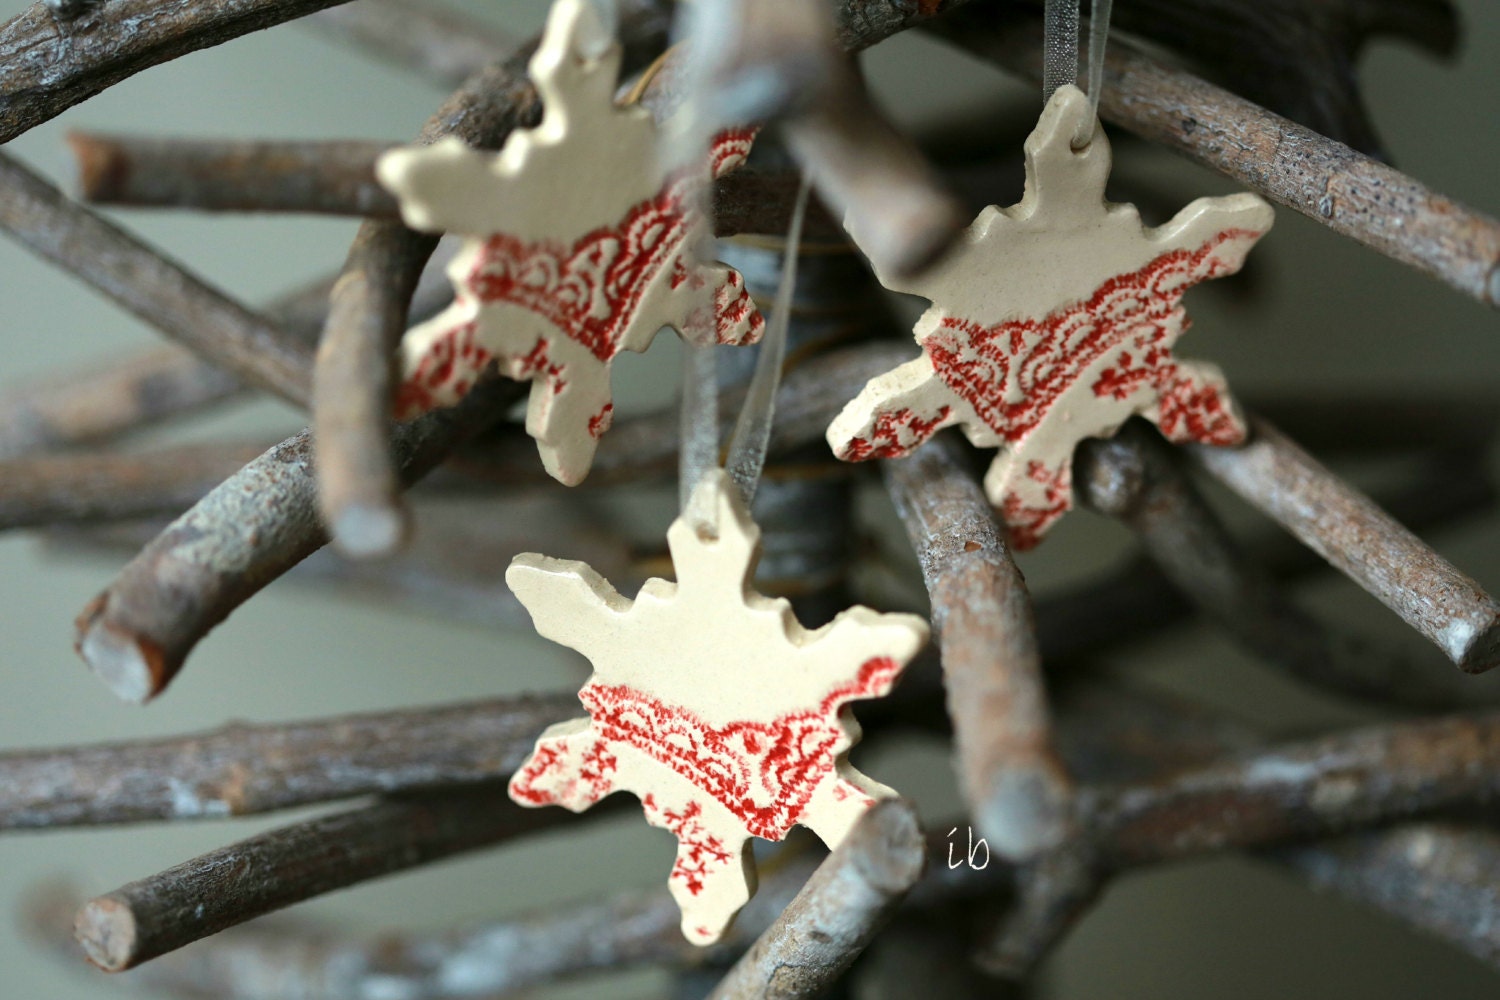 Snowflake Pottery Lace Decoration White Red Ceramic Ornament Set of 3 Wedding Gift - Ceraminic